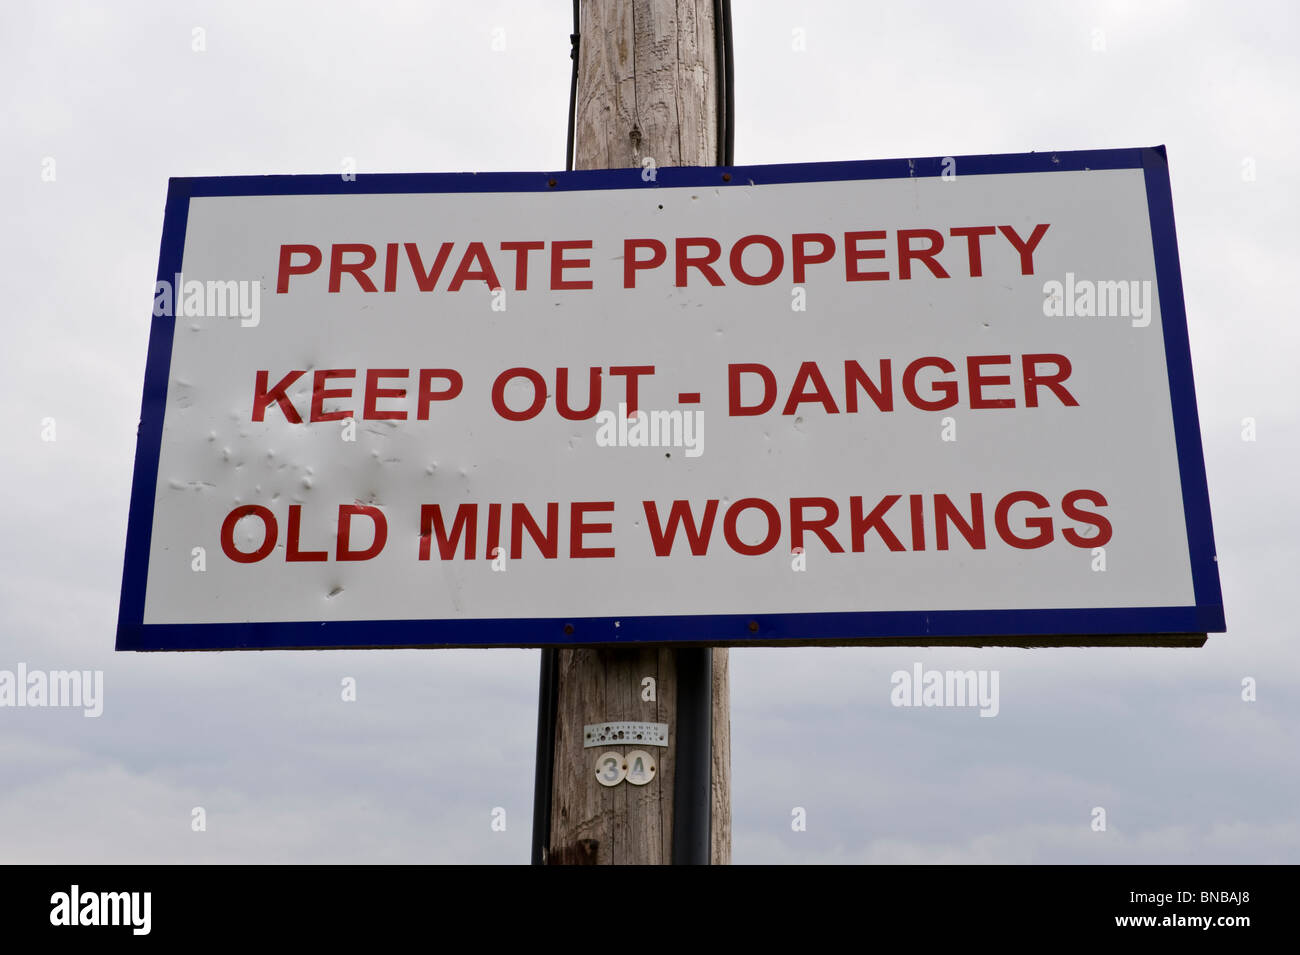 PRIVATE PROPERTY KEEP OUT DANGER OLD MINE WORKINGS sign on former colliery site at The British Torfaen South Wales UK Stock Photo